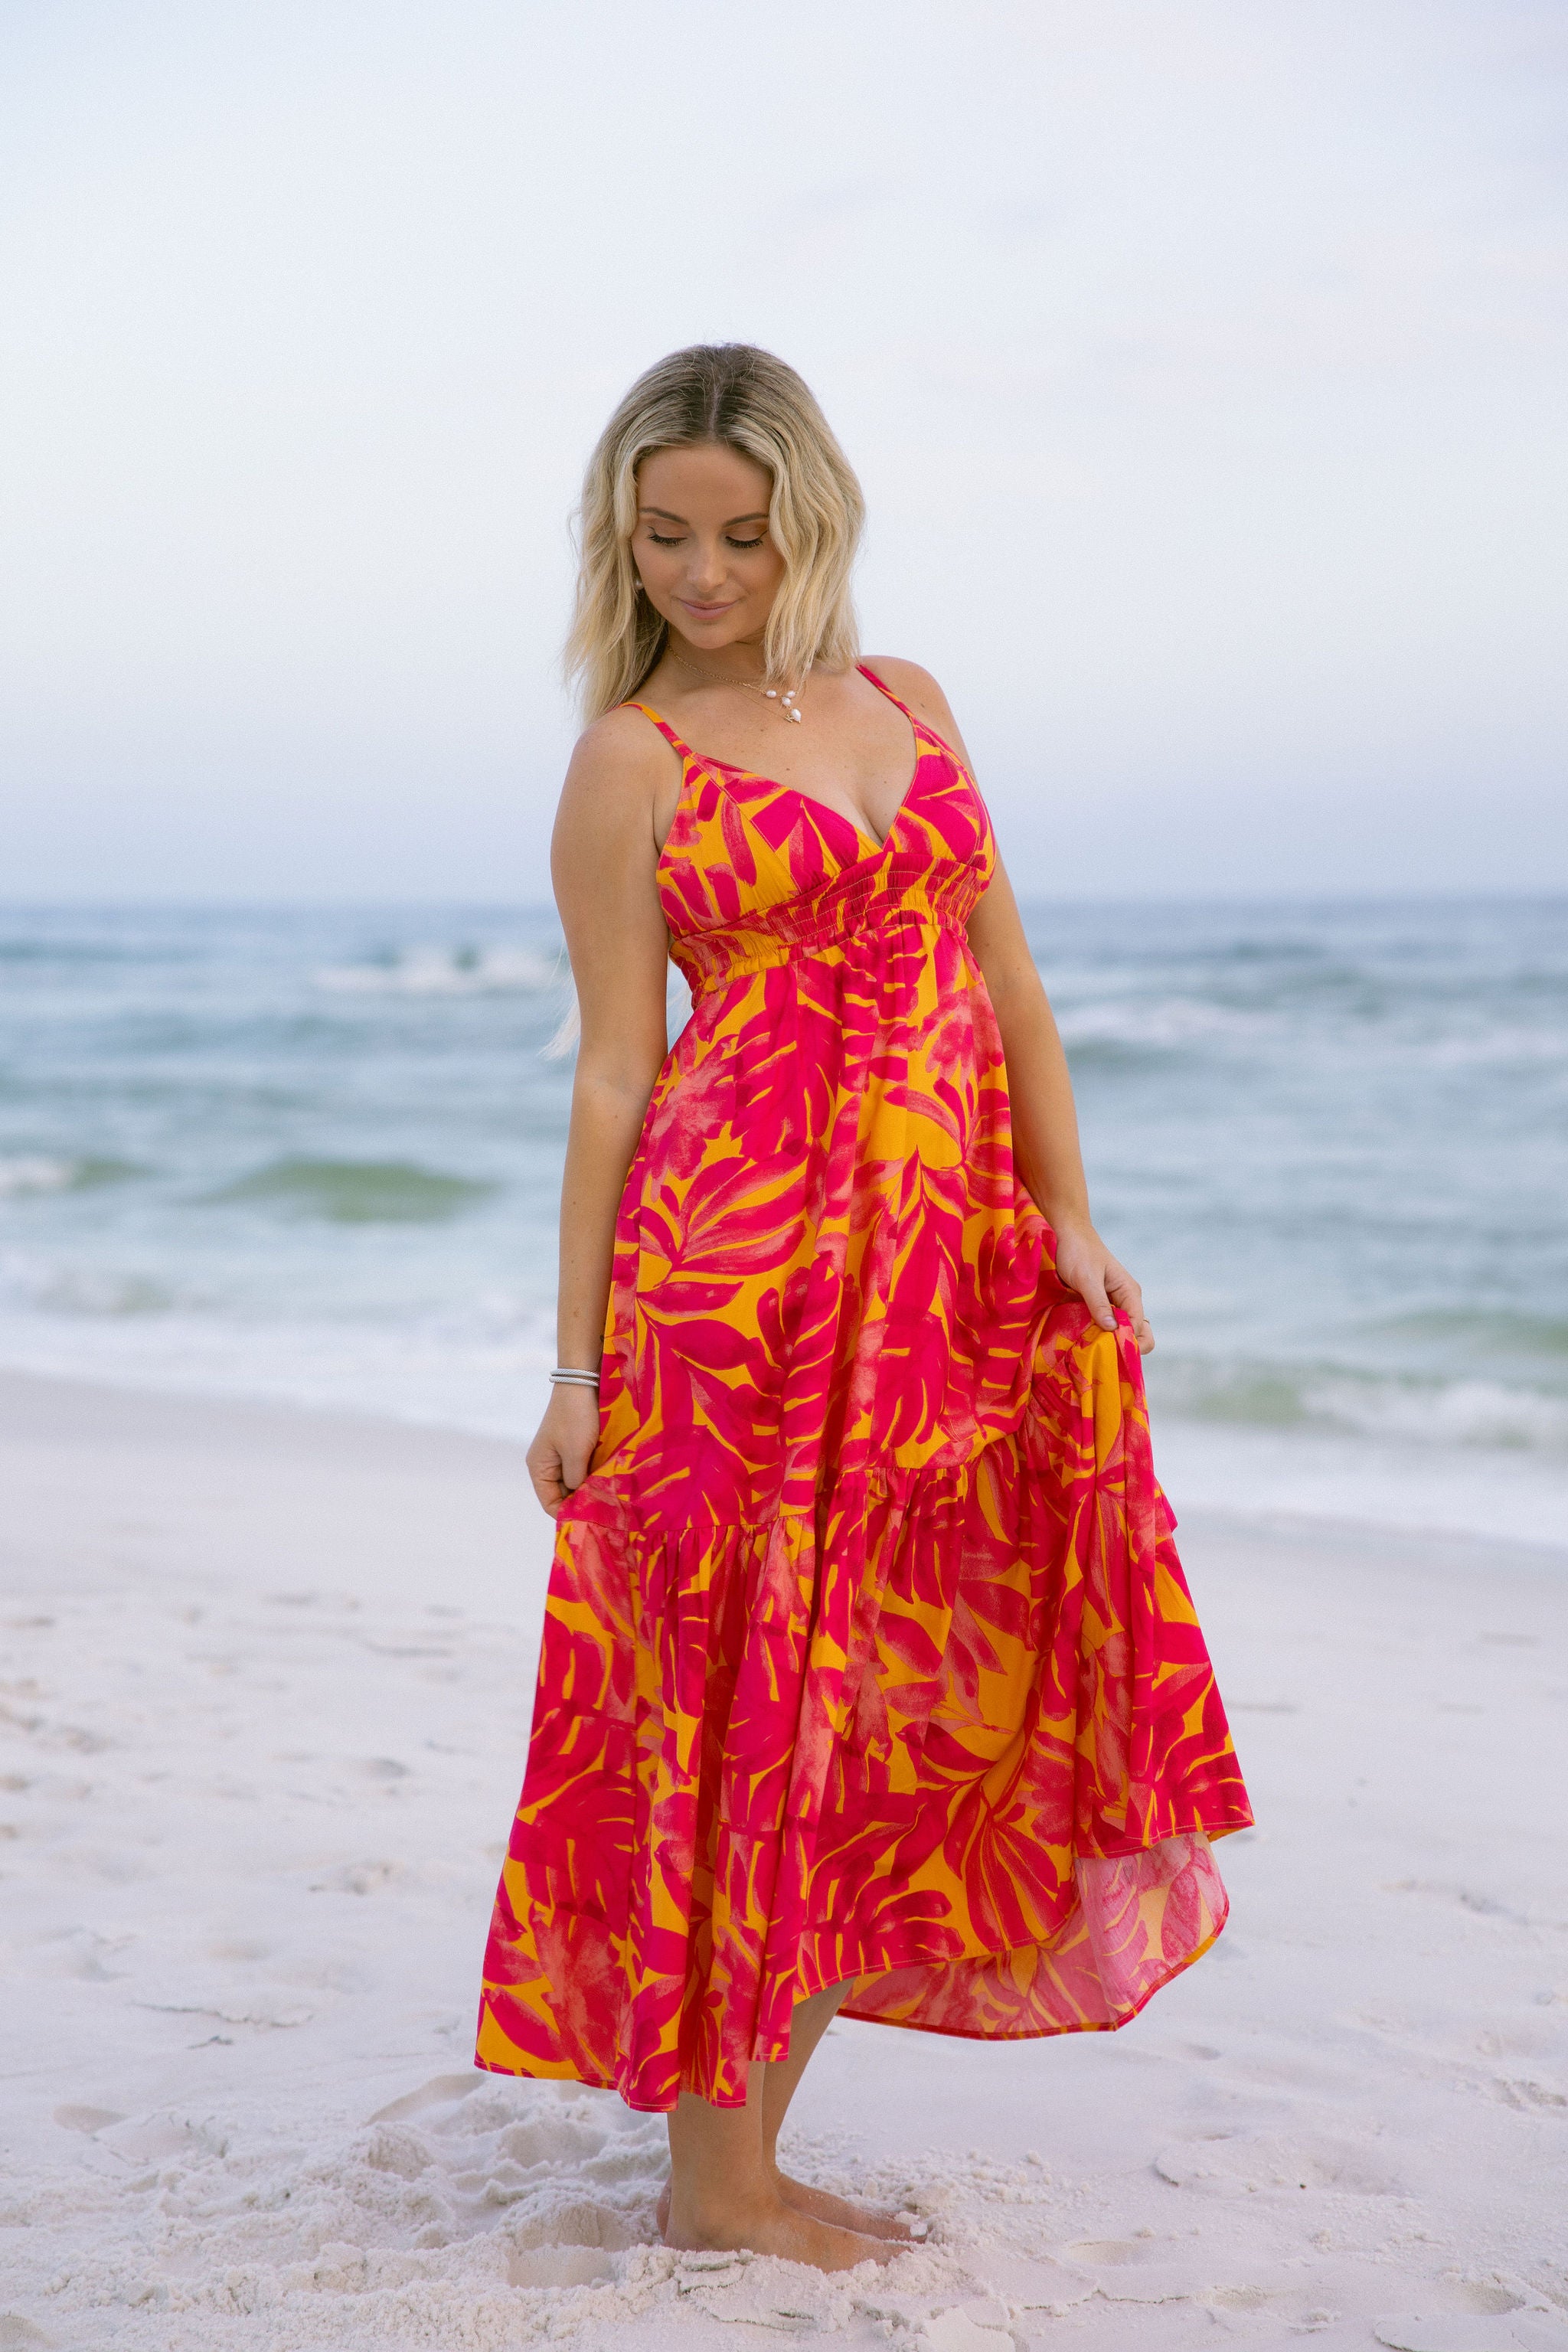 Full body front view of female model wearing the Melina Orange & Pink Floral Maxi Dress that has bright orange and pink floral pattern, adjustable straps, and an open back.